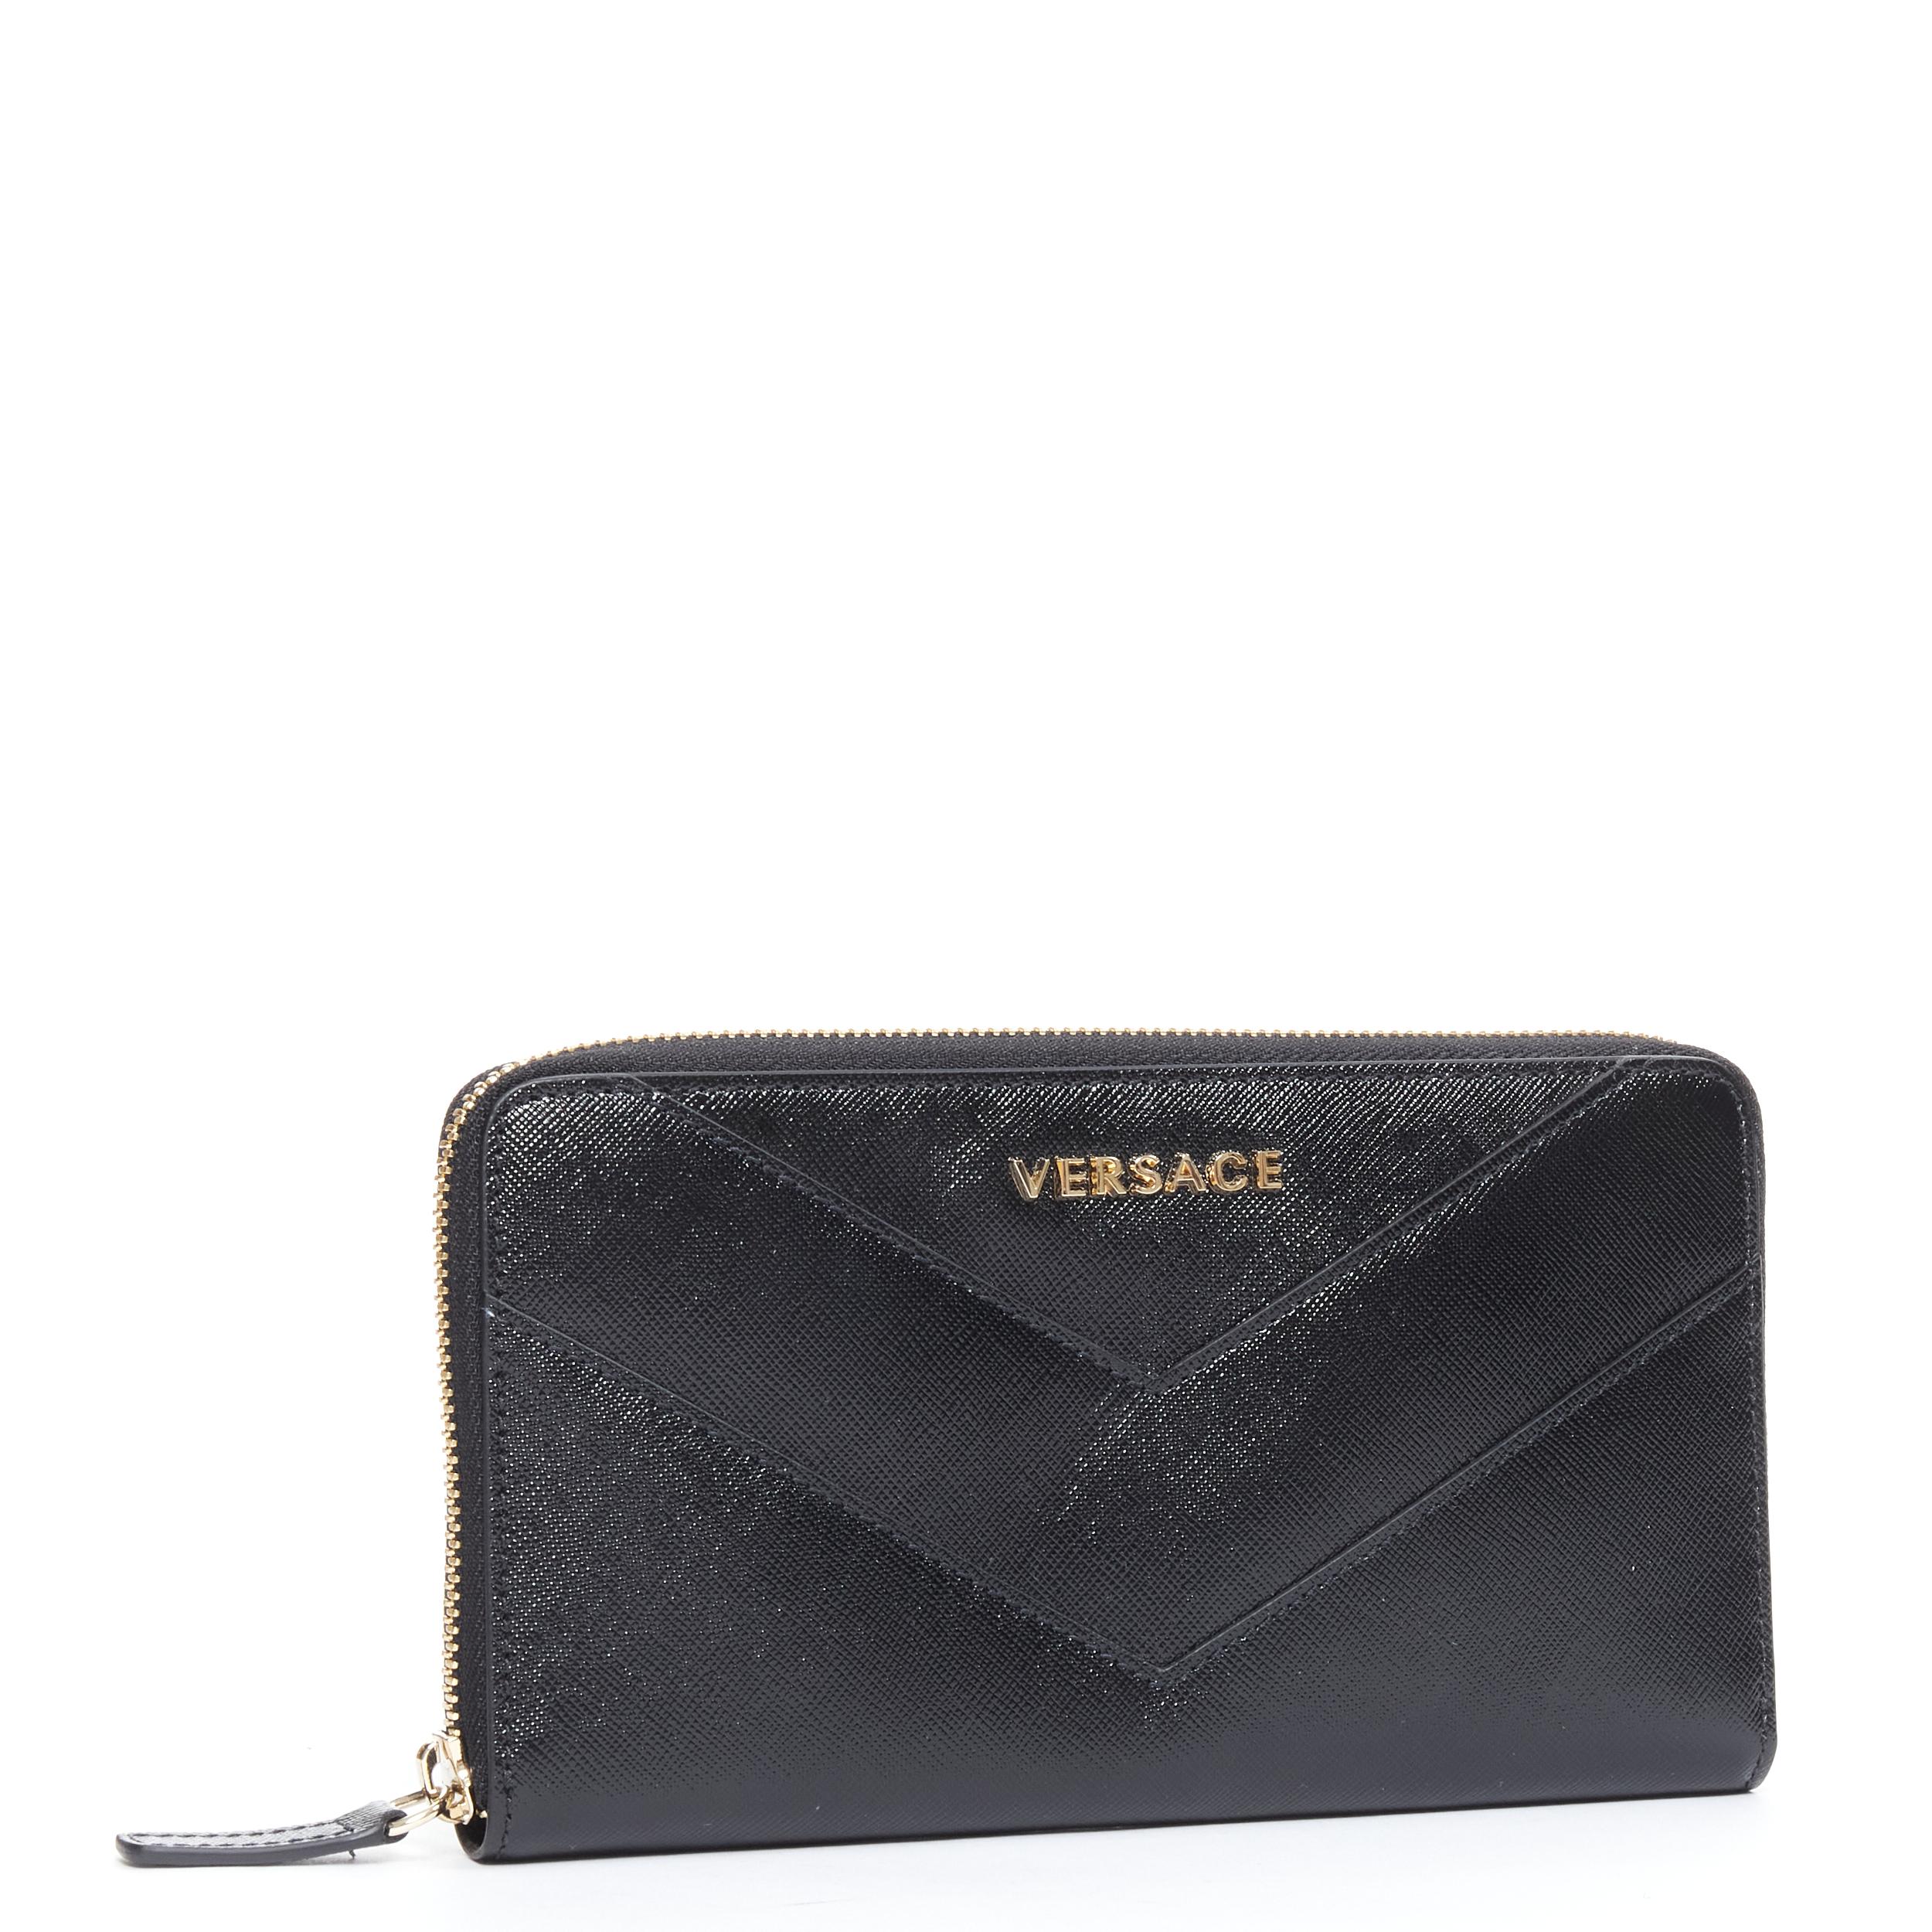 new VERSACE black saffiano leather gold logo V stitch continental long wallet 
Reference: TGAS/B01476 
Brand: Versace 
Designer: Donatella Versace 
Material: Leather 
Color: Black 
Pattern: Solid 
Closure: Zip 
Extra Detail: Black saffiano leather.